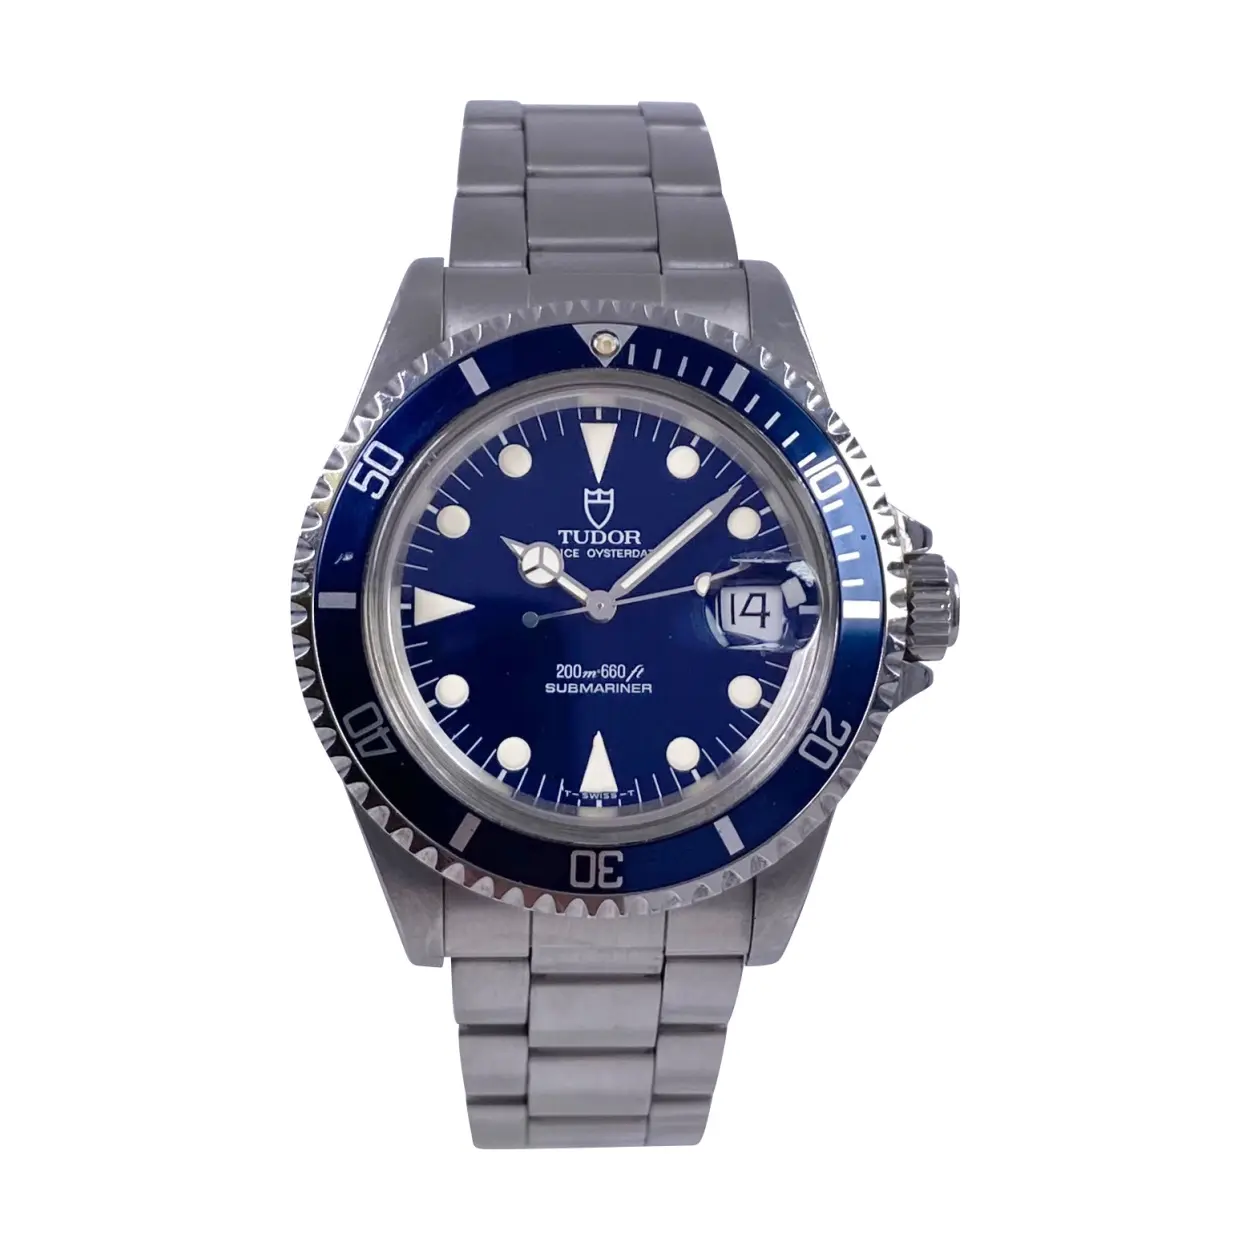 Tudor Oyster Prince Submariner 79090 40mm Stainless steel Blue